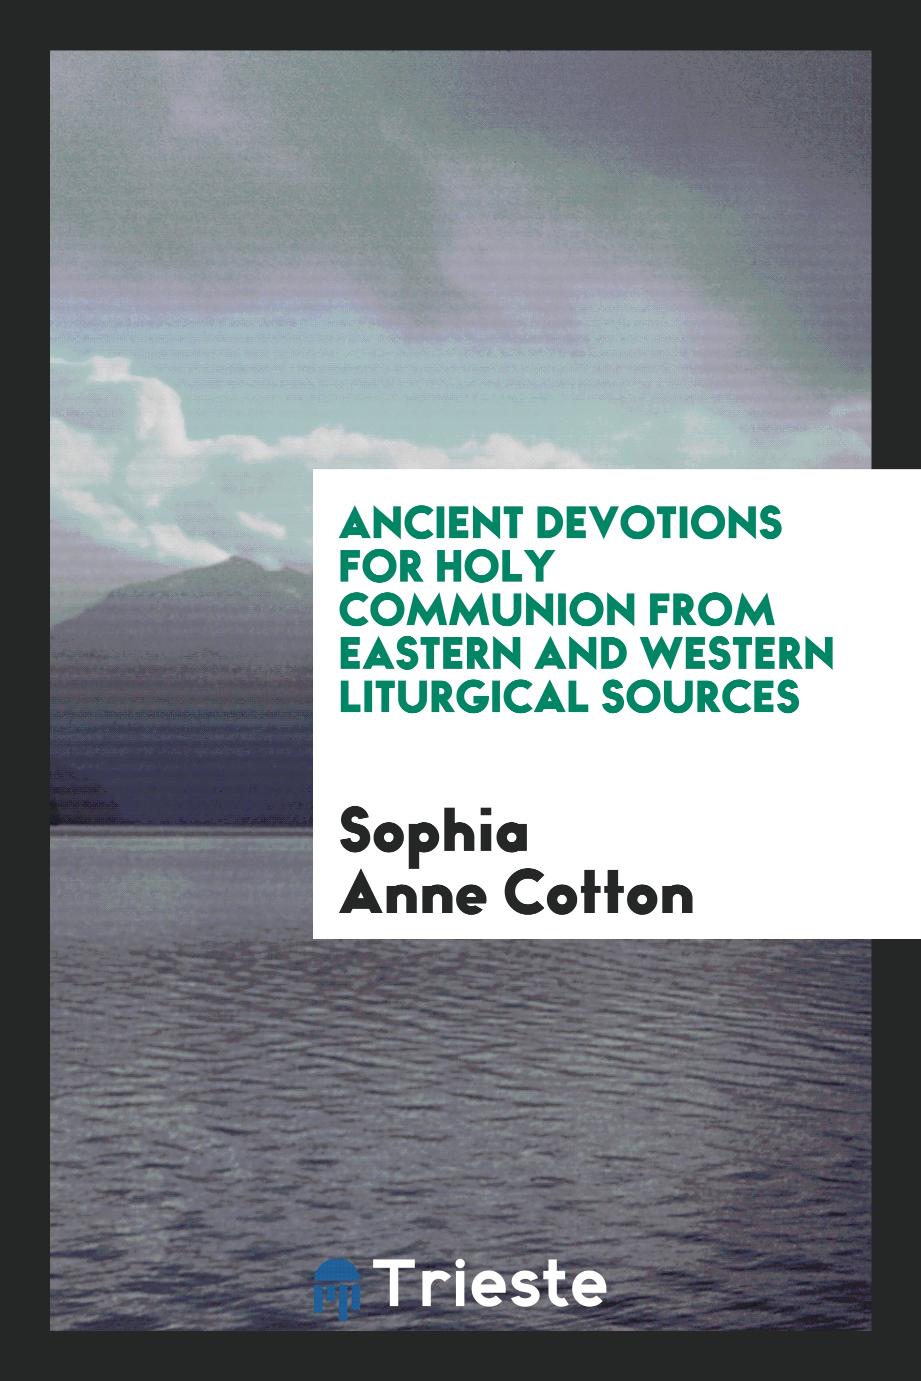 Ancient devotions for Holy Communion from Eastern and Western liturgical sources